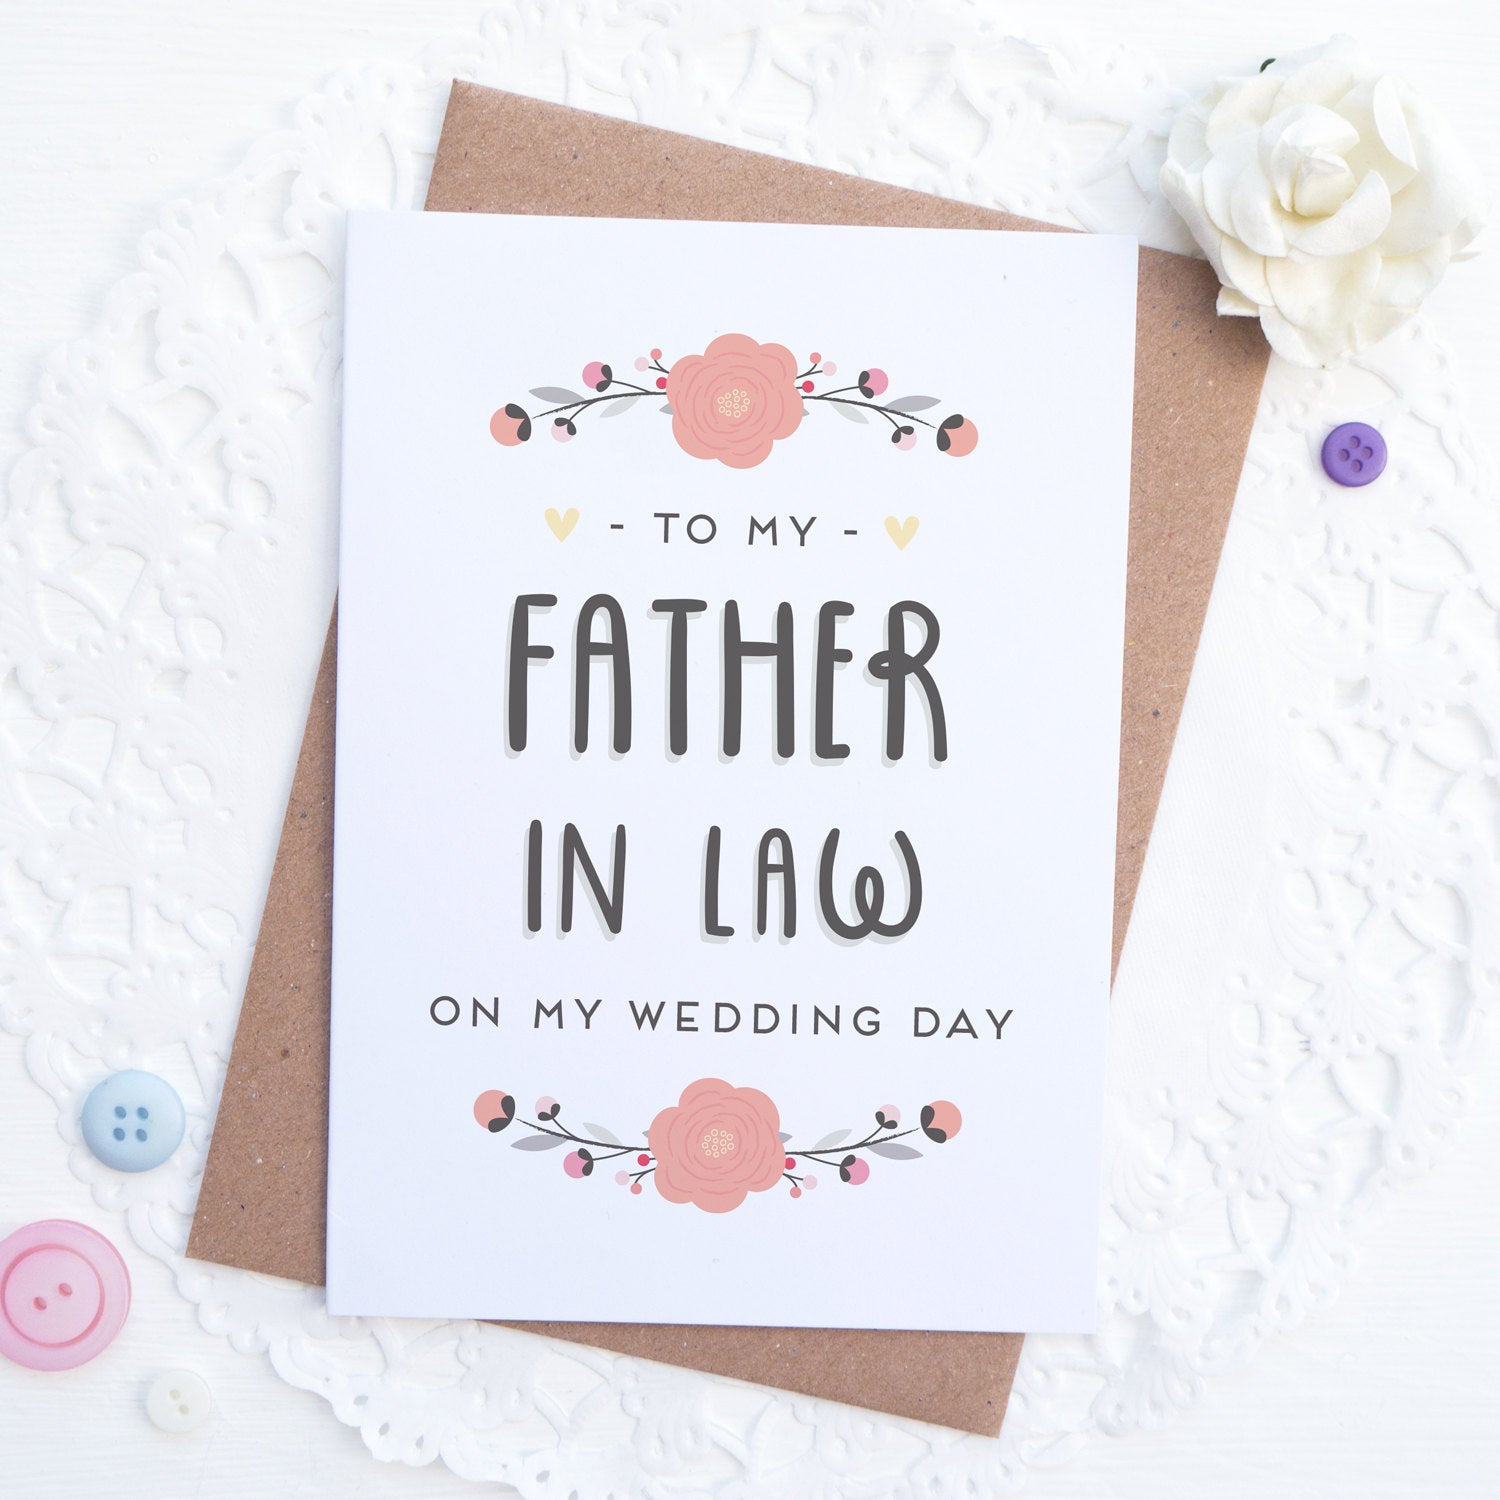 To my father in law on my wedding day card in pink